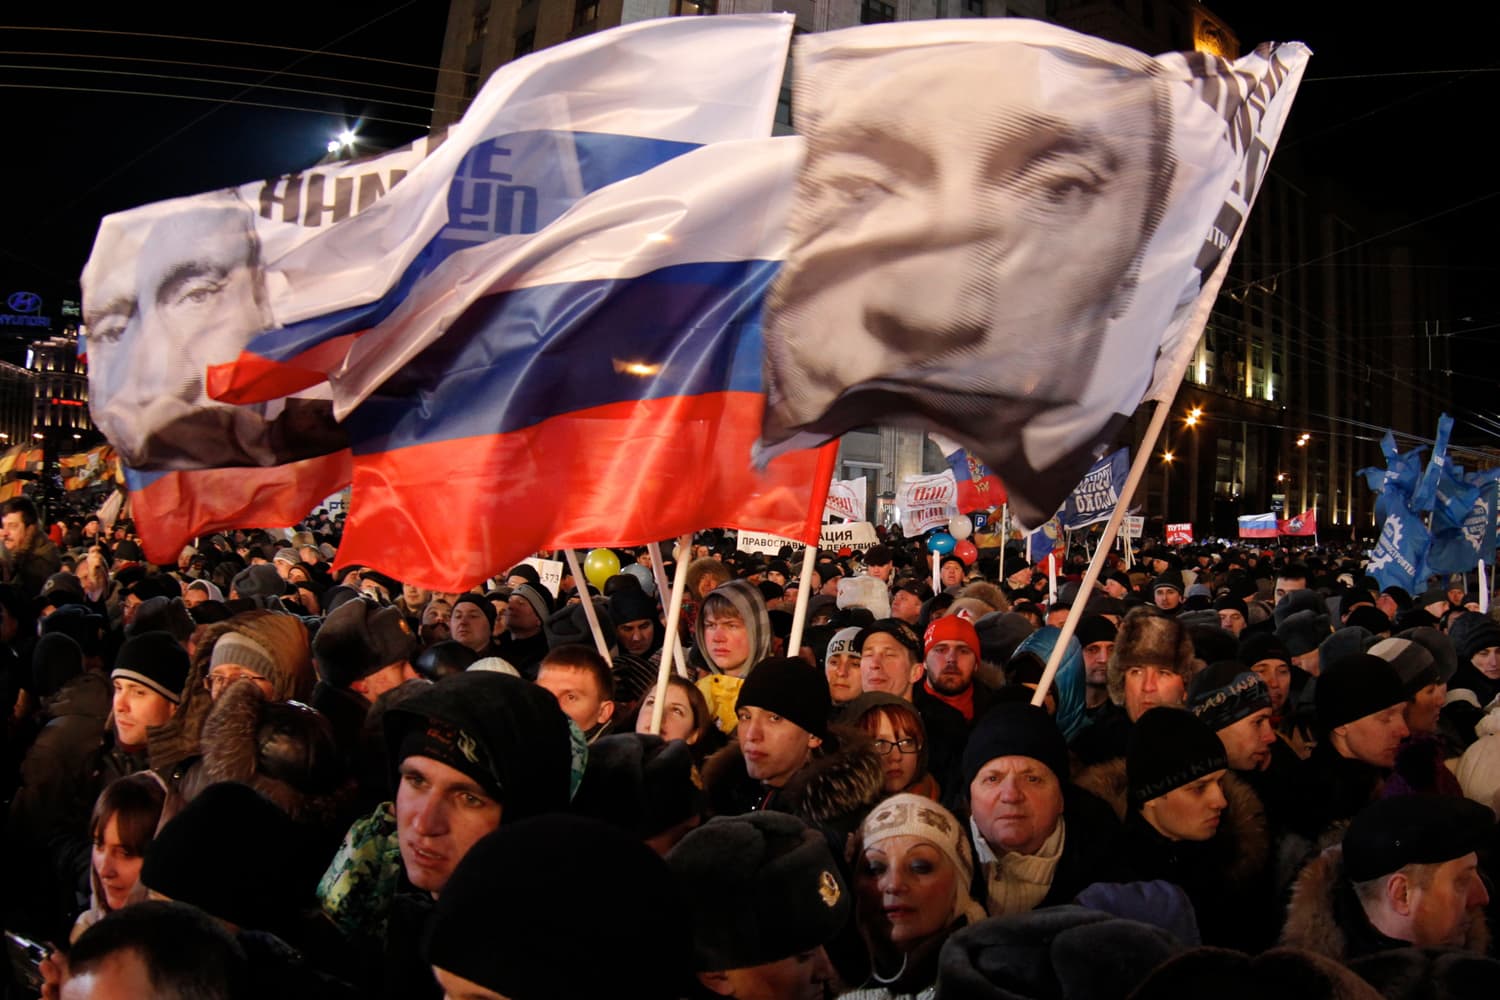 Supporters of Russian Prime Minister Vladimir Putin rally at Manezh square outside Kremlin, in Moscow, Russia, Sunday, March 4, 2012. (Ivan Sekretarev/AP)